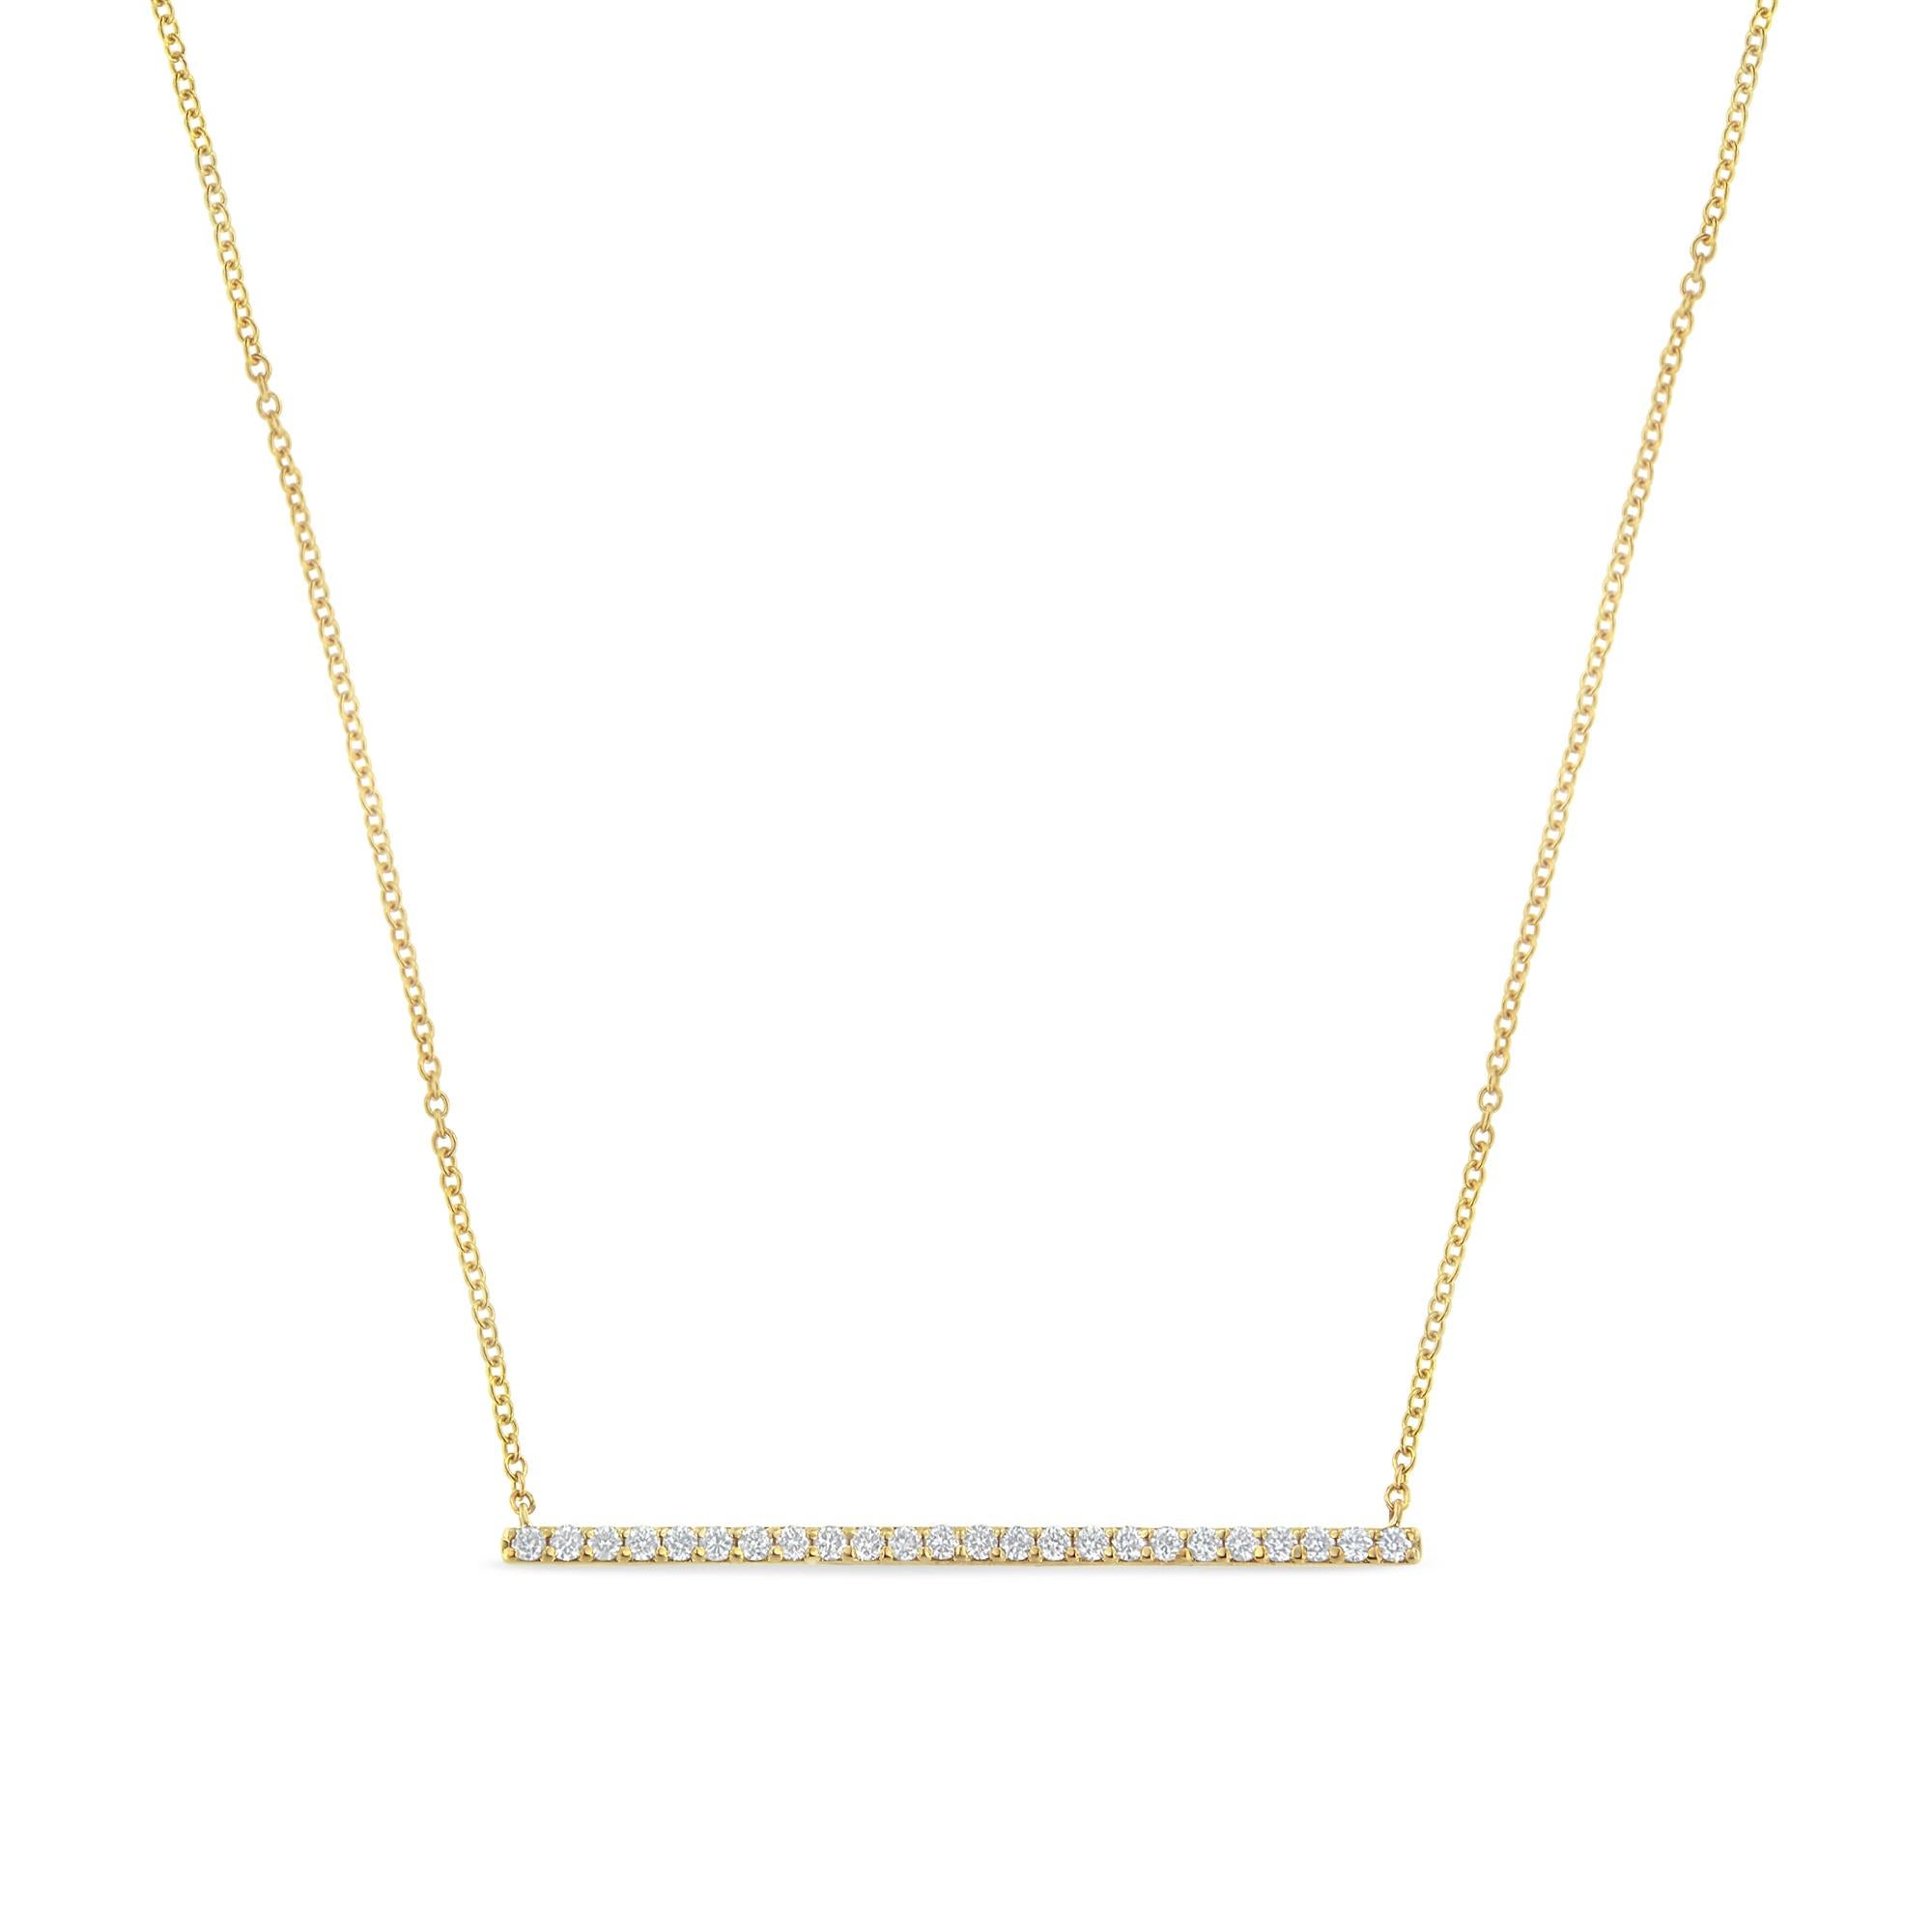 Timeless and simple, this stunning 10 karats yellow gold neckpiece will add glittering modishness to your style. The rope chain features sparkling round brilliant cut diamond bar pendant. Further, it is highly polished with grace to enhance every